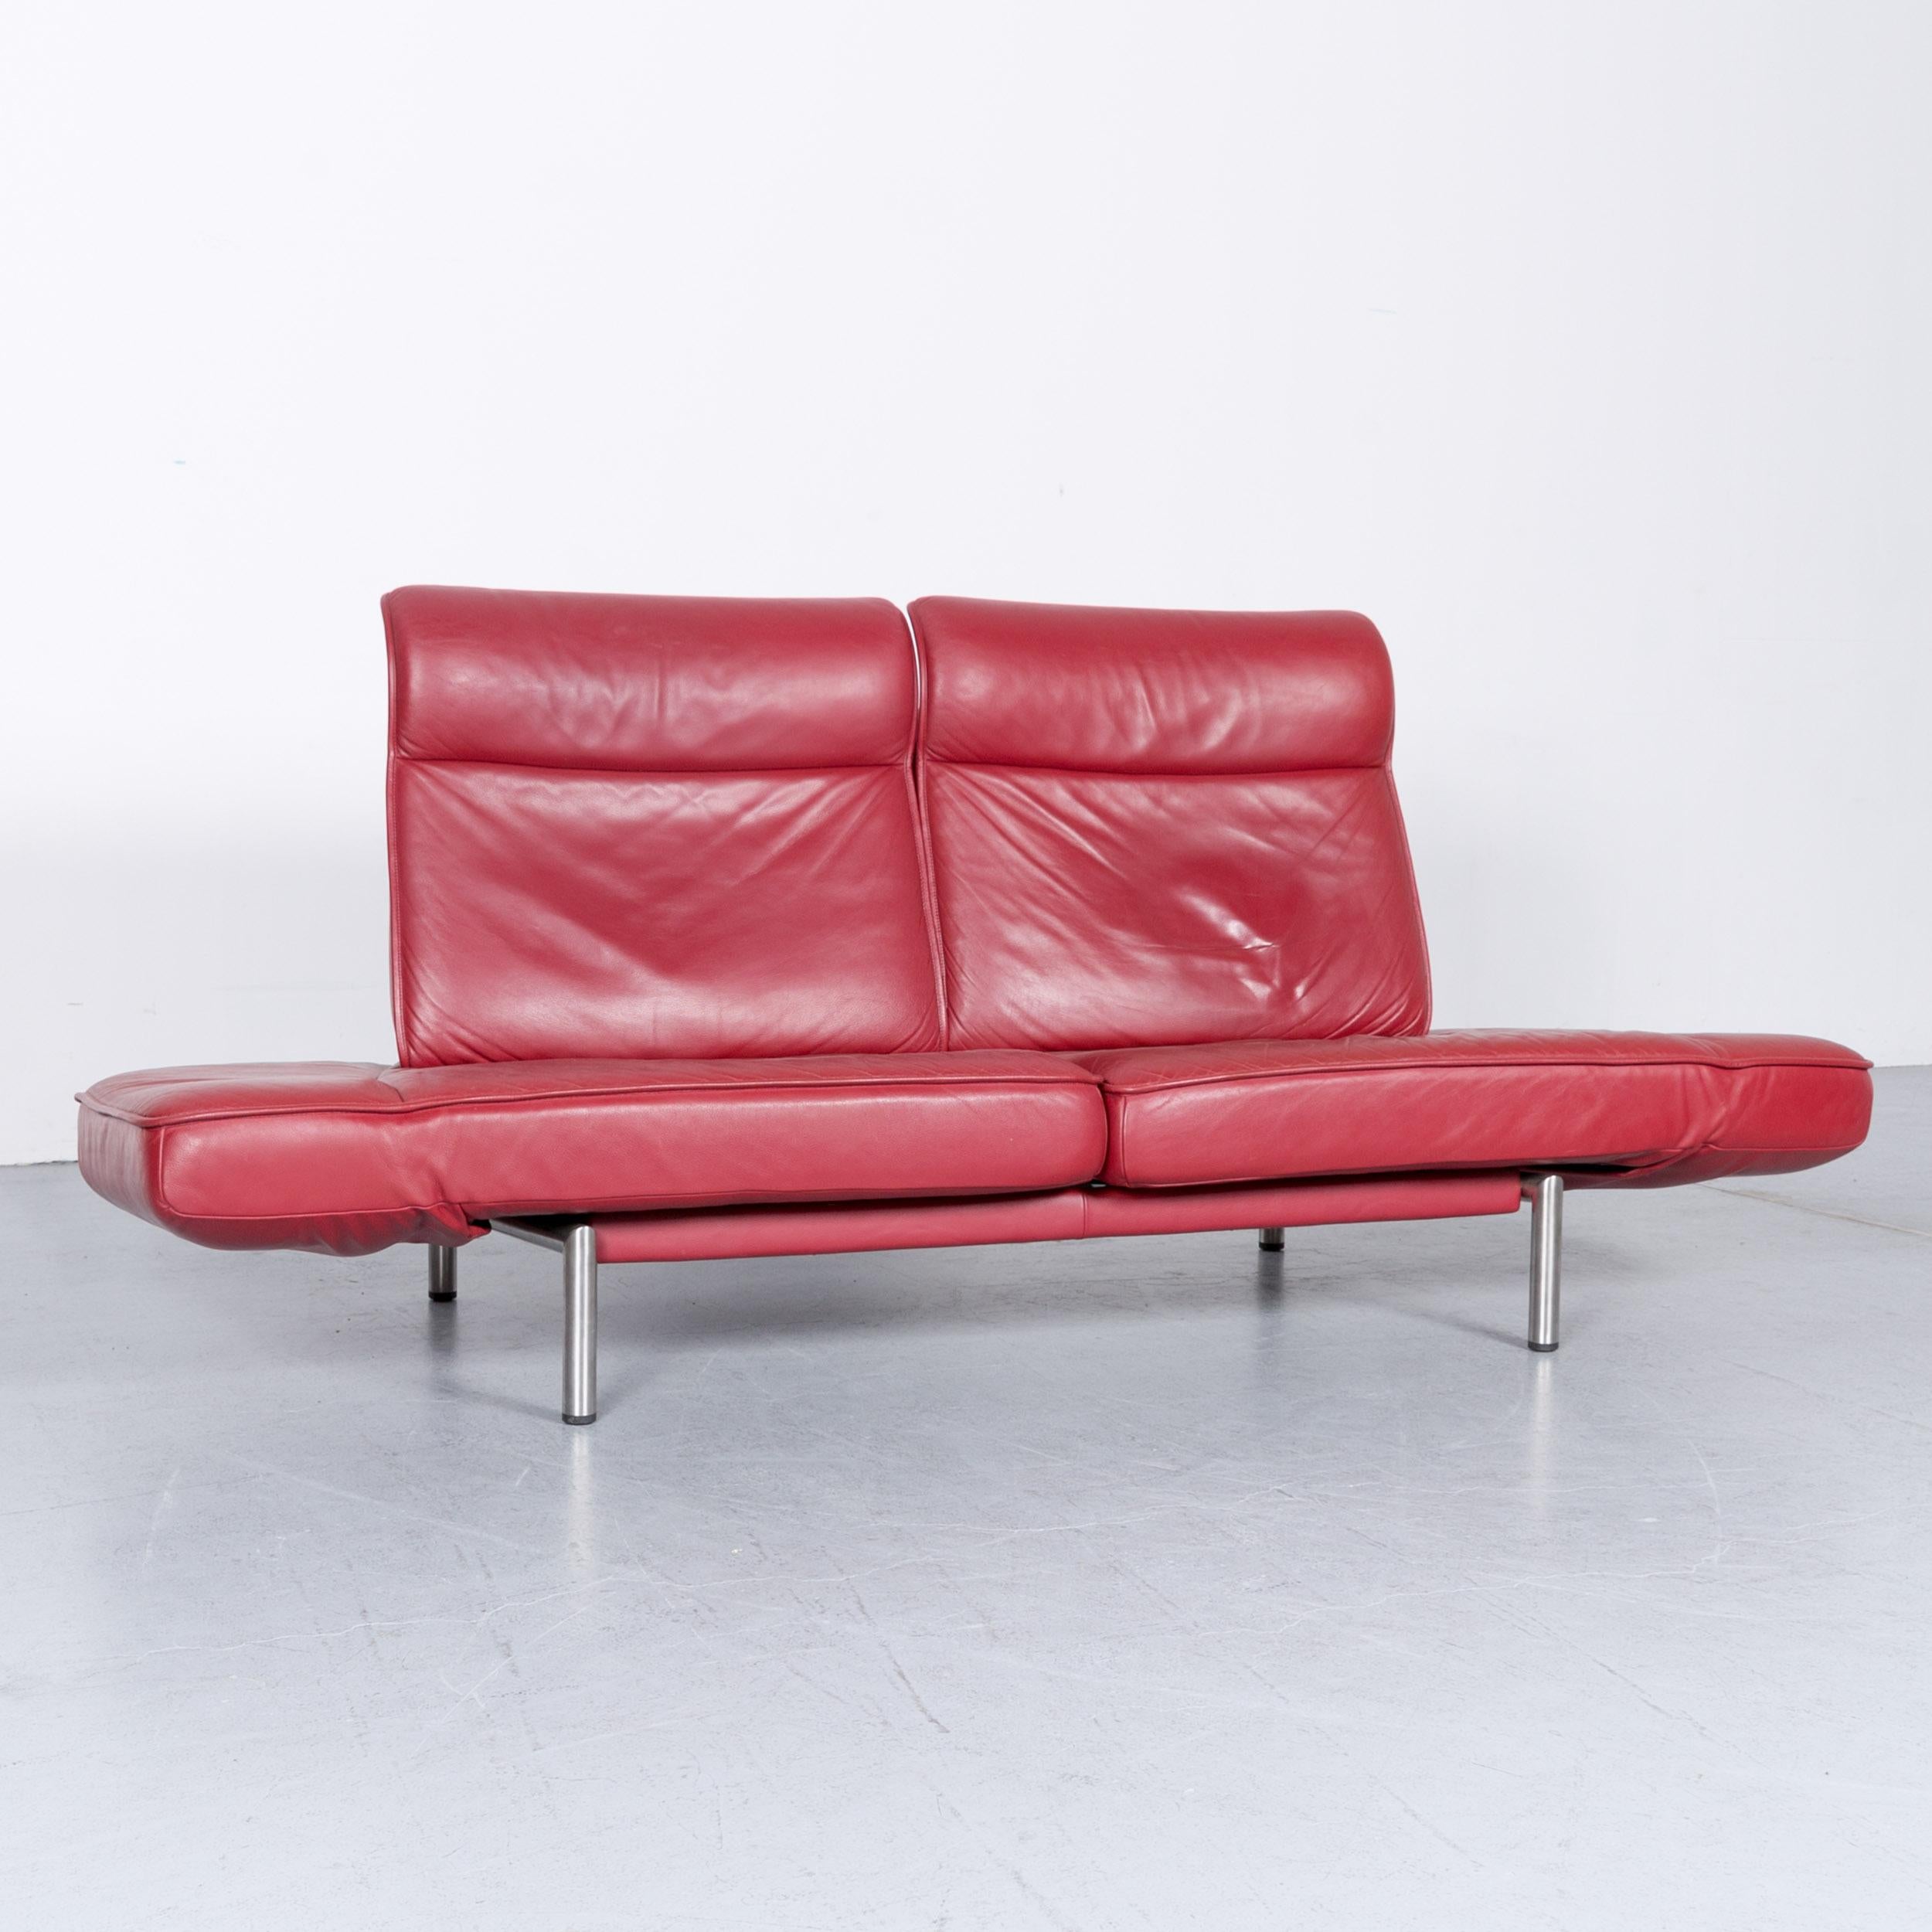 Swiss De Sede DS 450 Designer Sofa Red Leather Two-Seat Couch Made in Switzerland